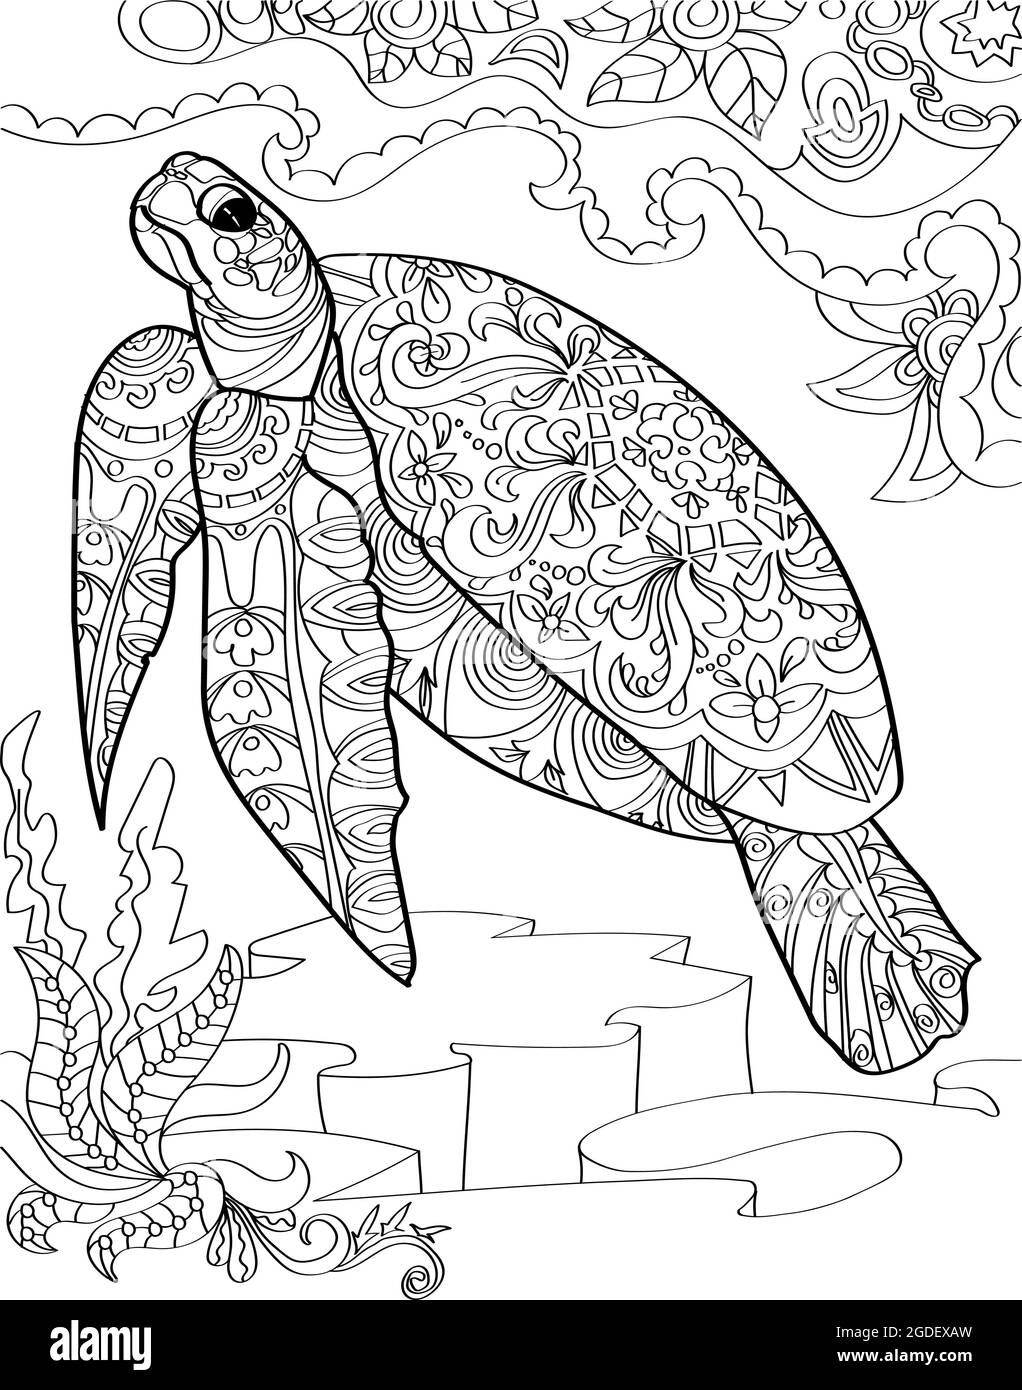 Large sea turtle below the ocean swimming upward colorless line drawing huge aquatic tortoise swims up coloring book page stock vector image art